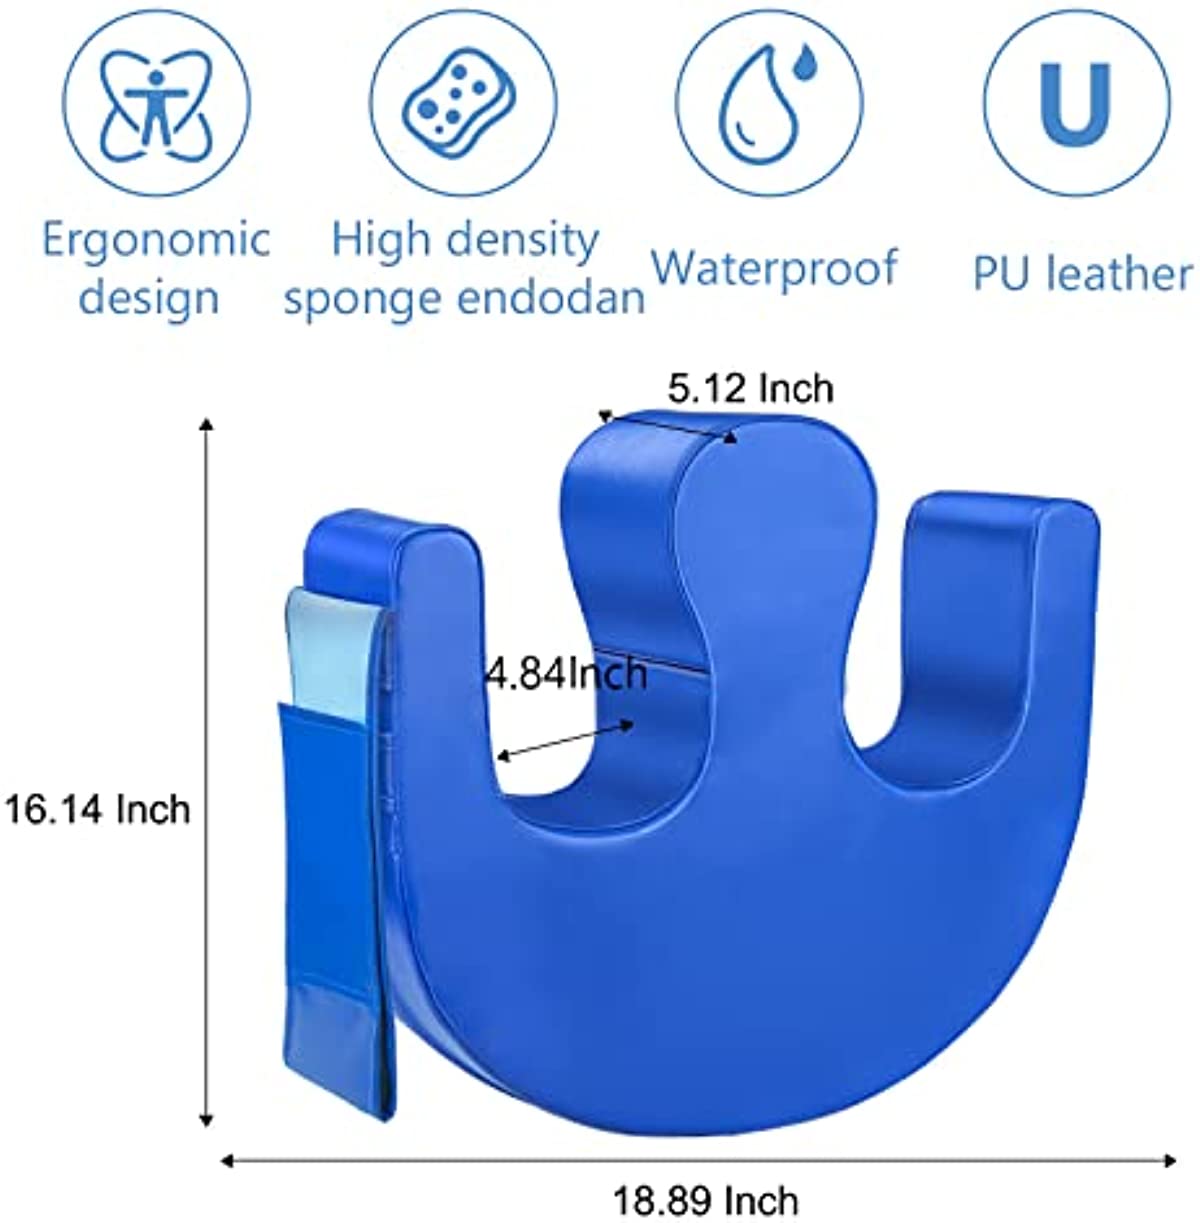 Duzzy Patient Turning Device, Turnover Device for Bedridden Elderly Patients, Waterproof Detachable PU Leather Turning Pillow, Lift Assist Nursing Help The Bedridden Patient Products (Blue)